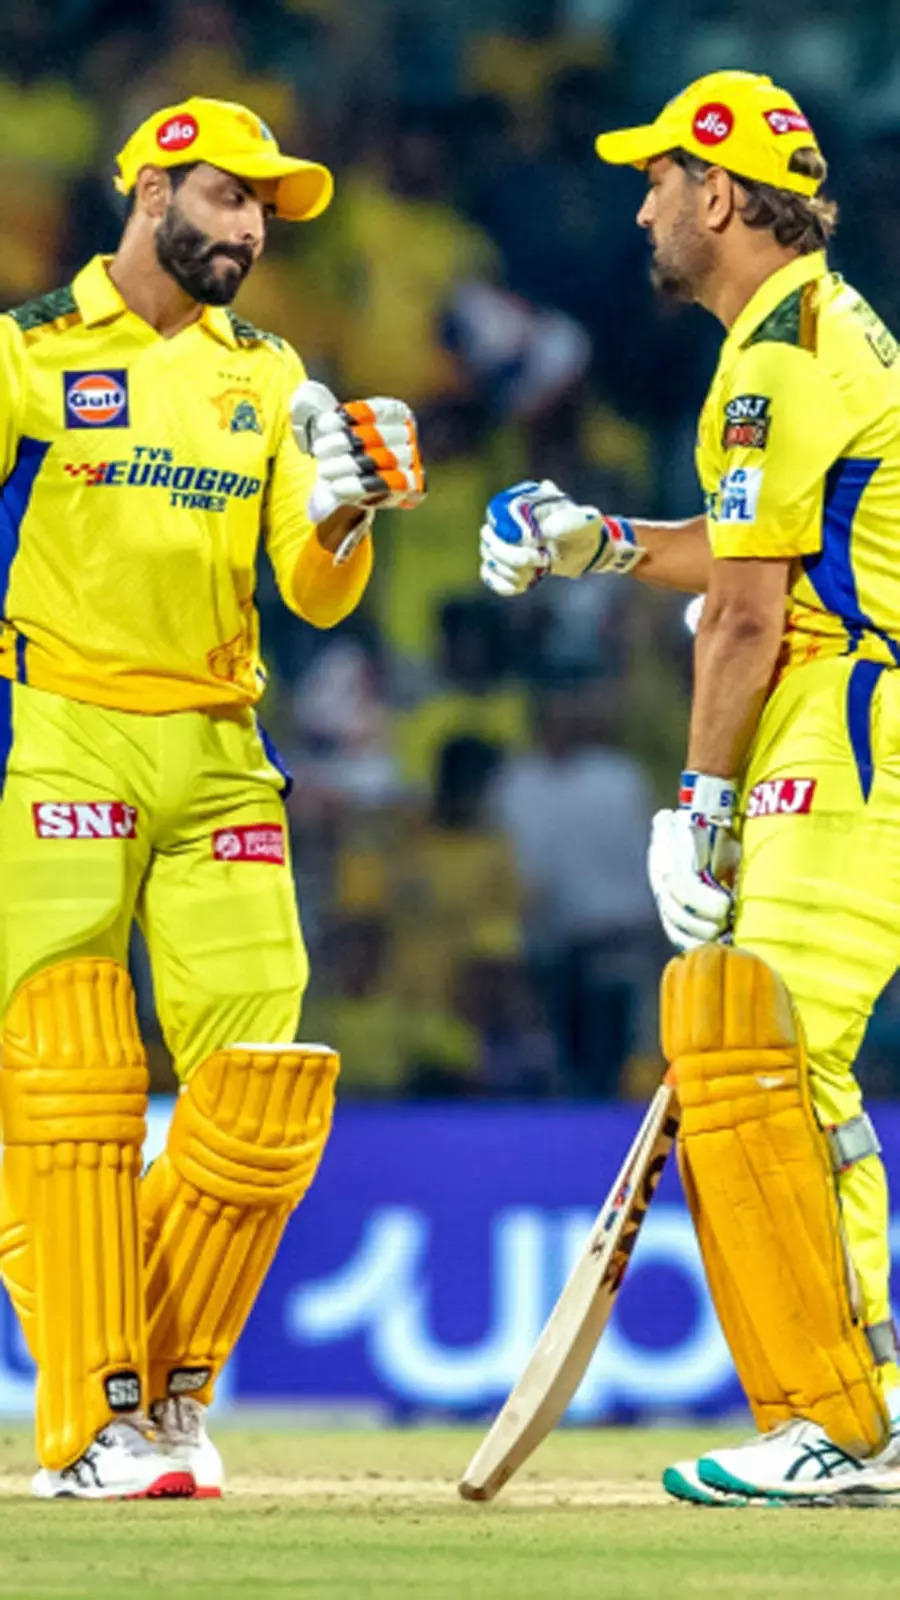 csk images hd